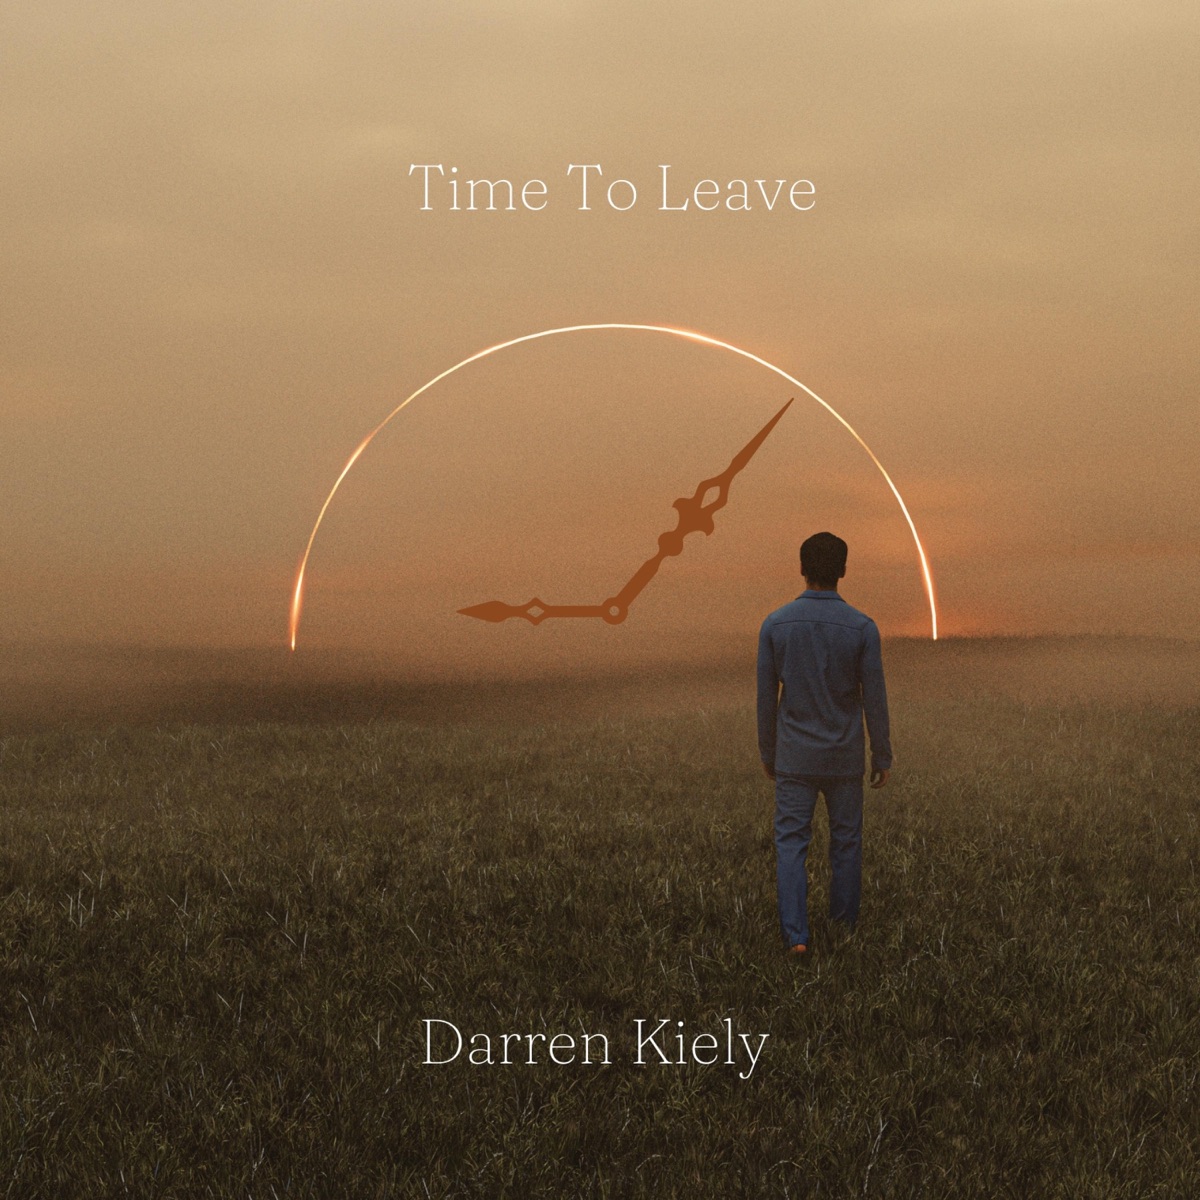 Lost & Found - Song by Darren Kiely - Apple Music